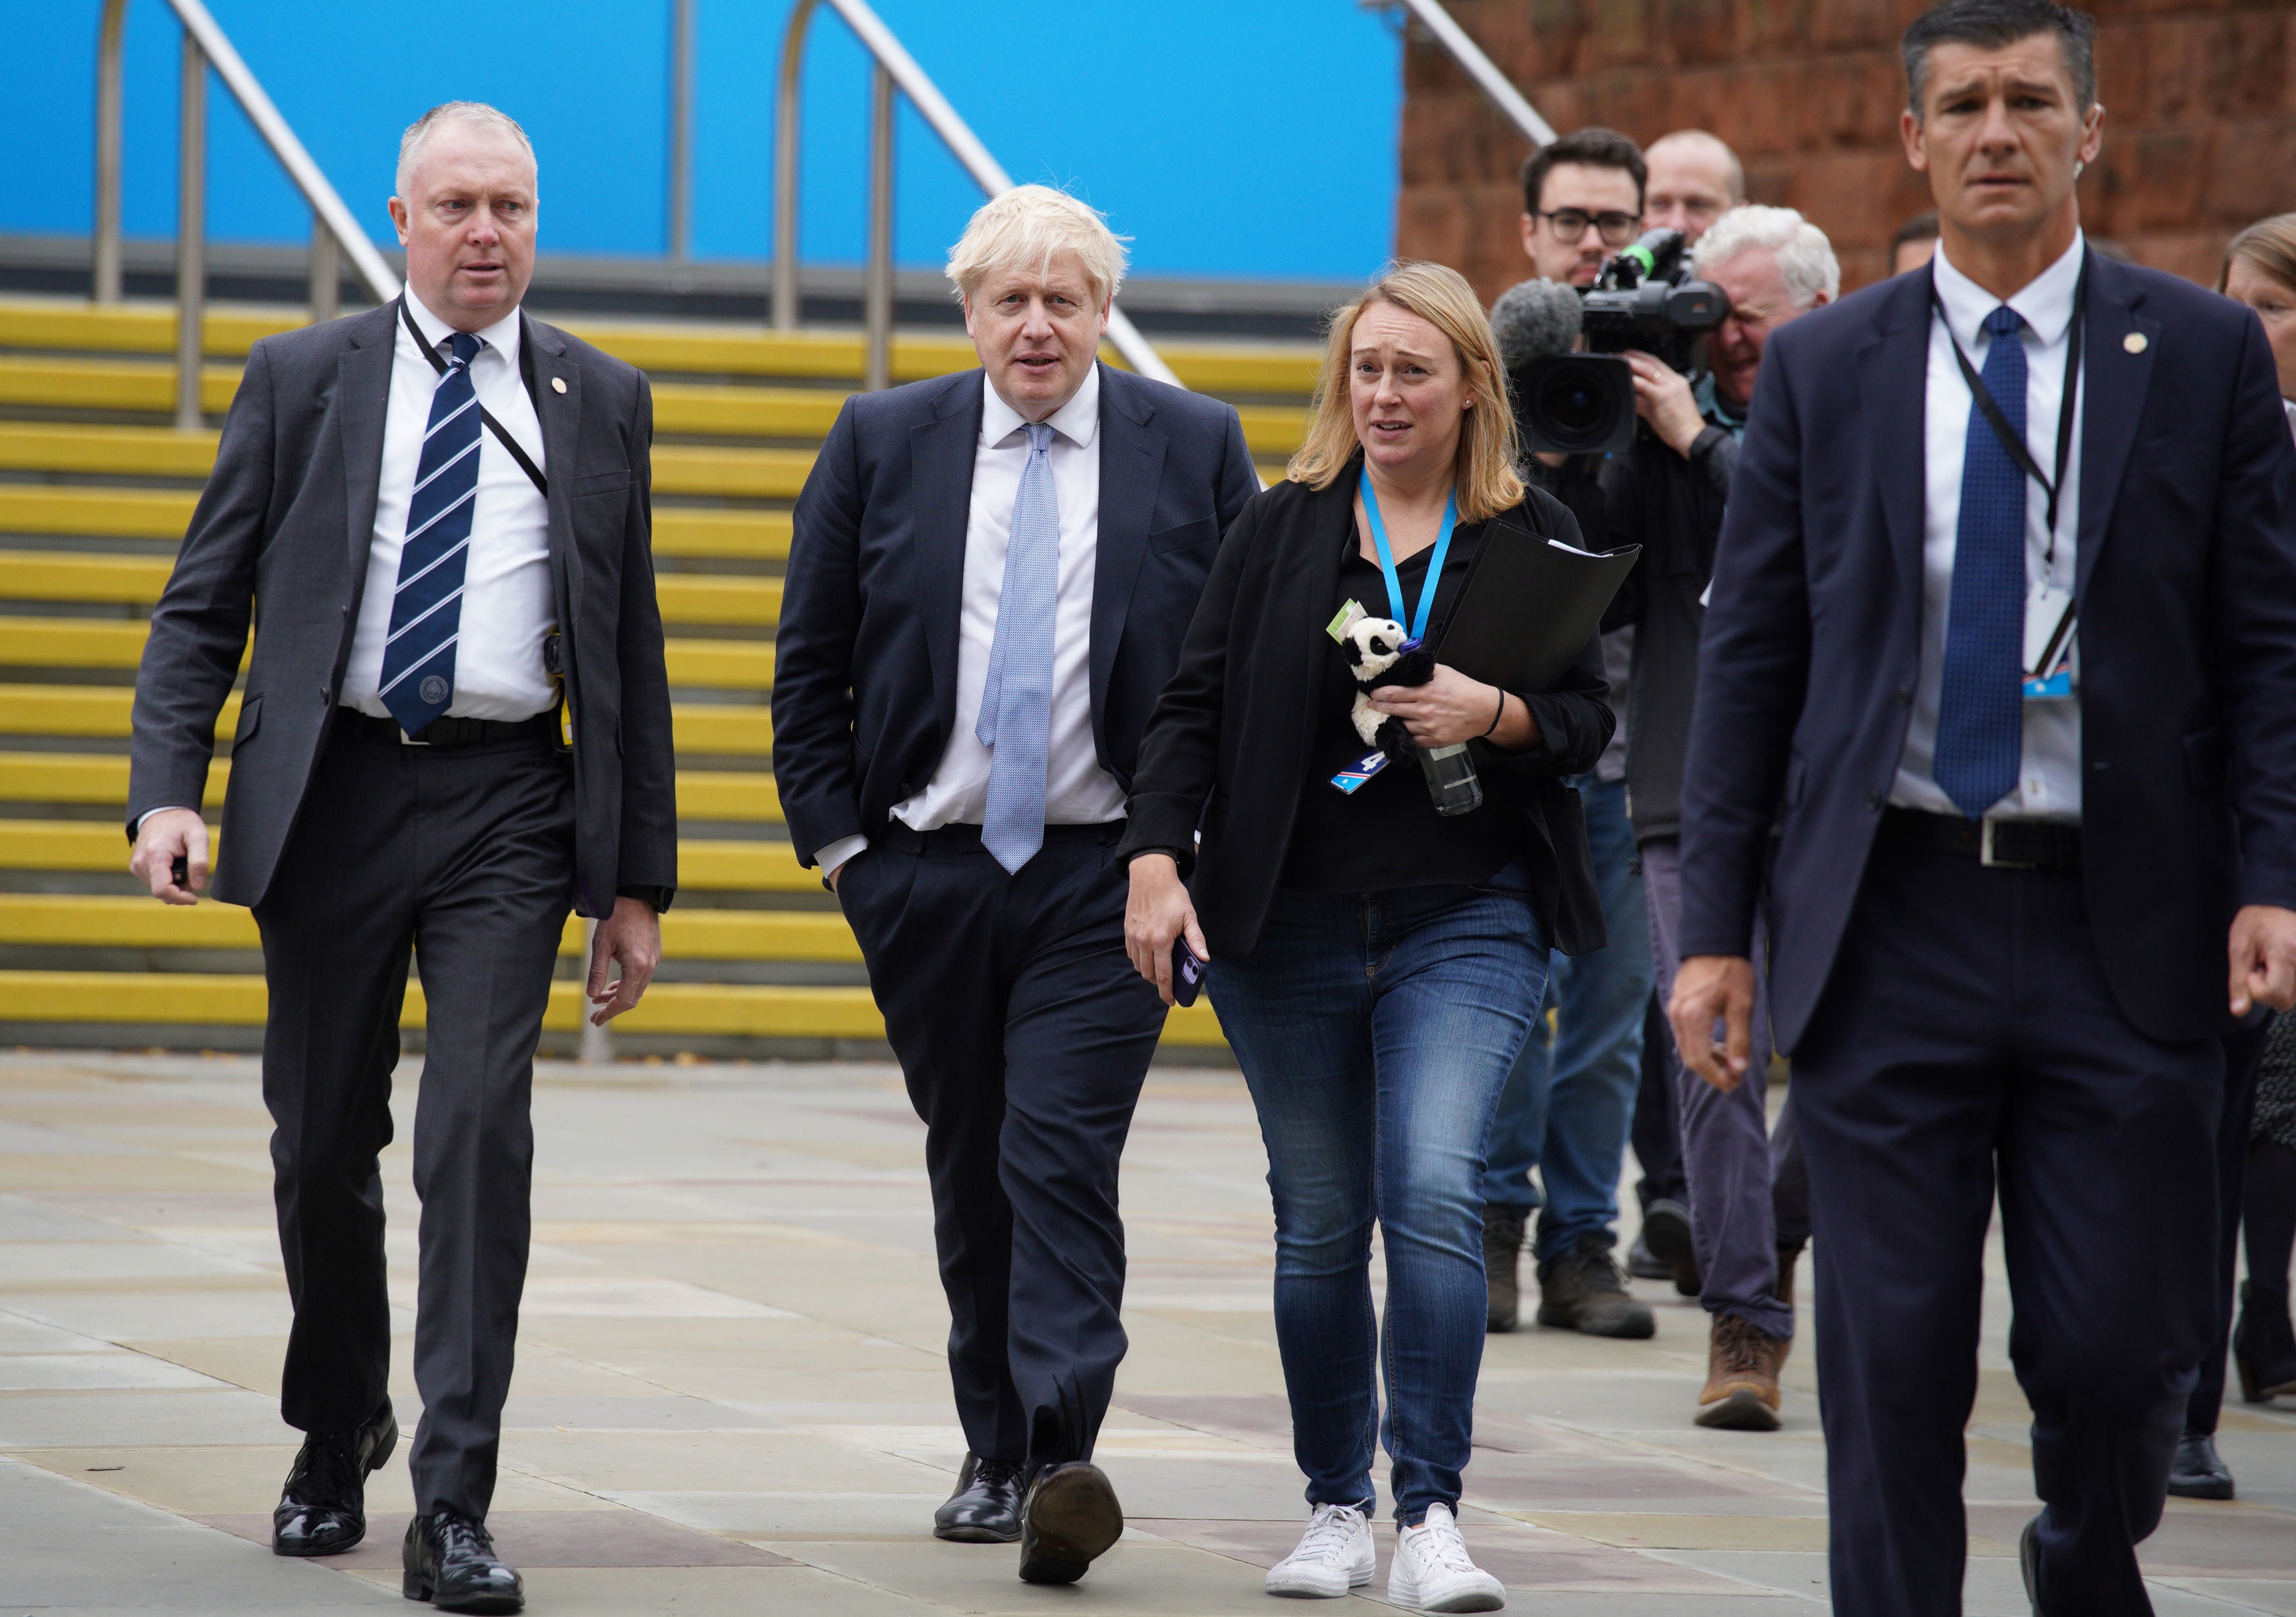 Boris Johnson at the Conservative Party conference in Manchester this week